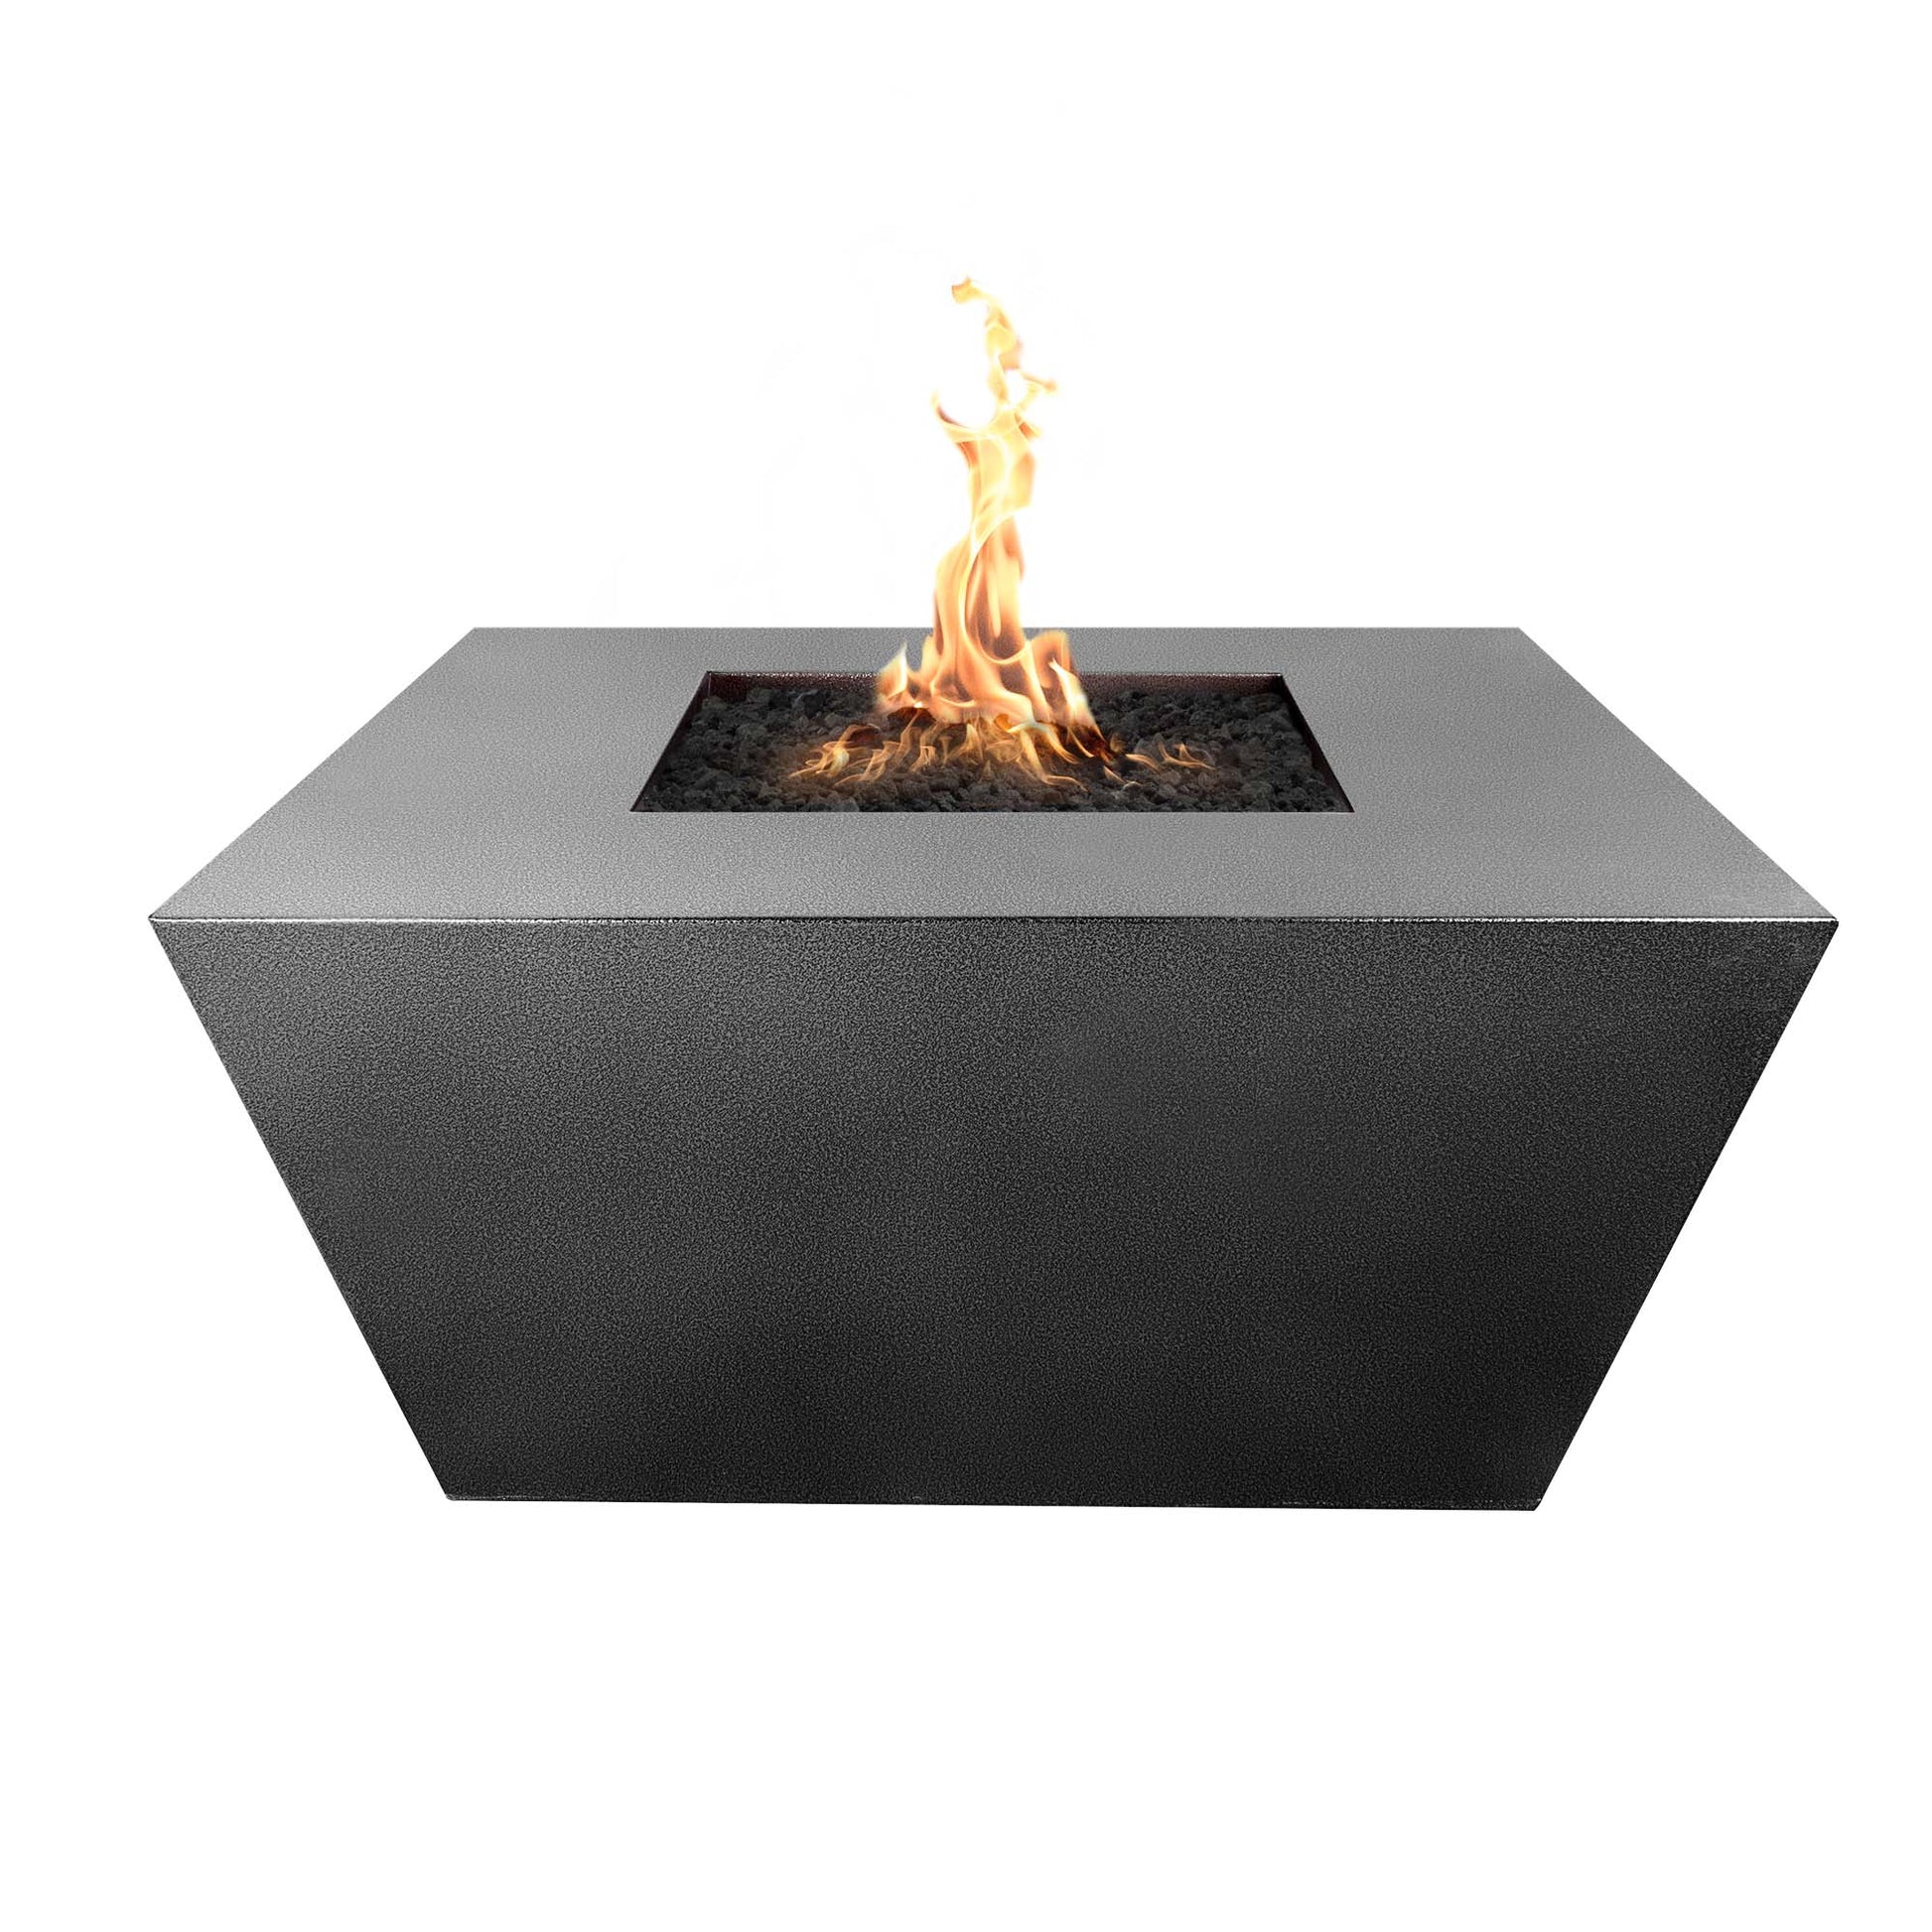 The Outdoor Plus Square Redan 48" Corten Steel Natural Gas Fire Pit with Match Lit Ignition